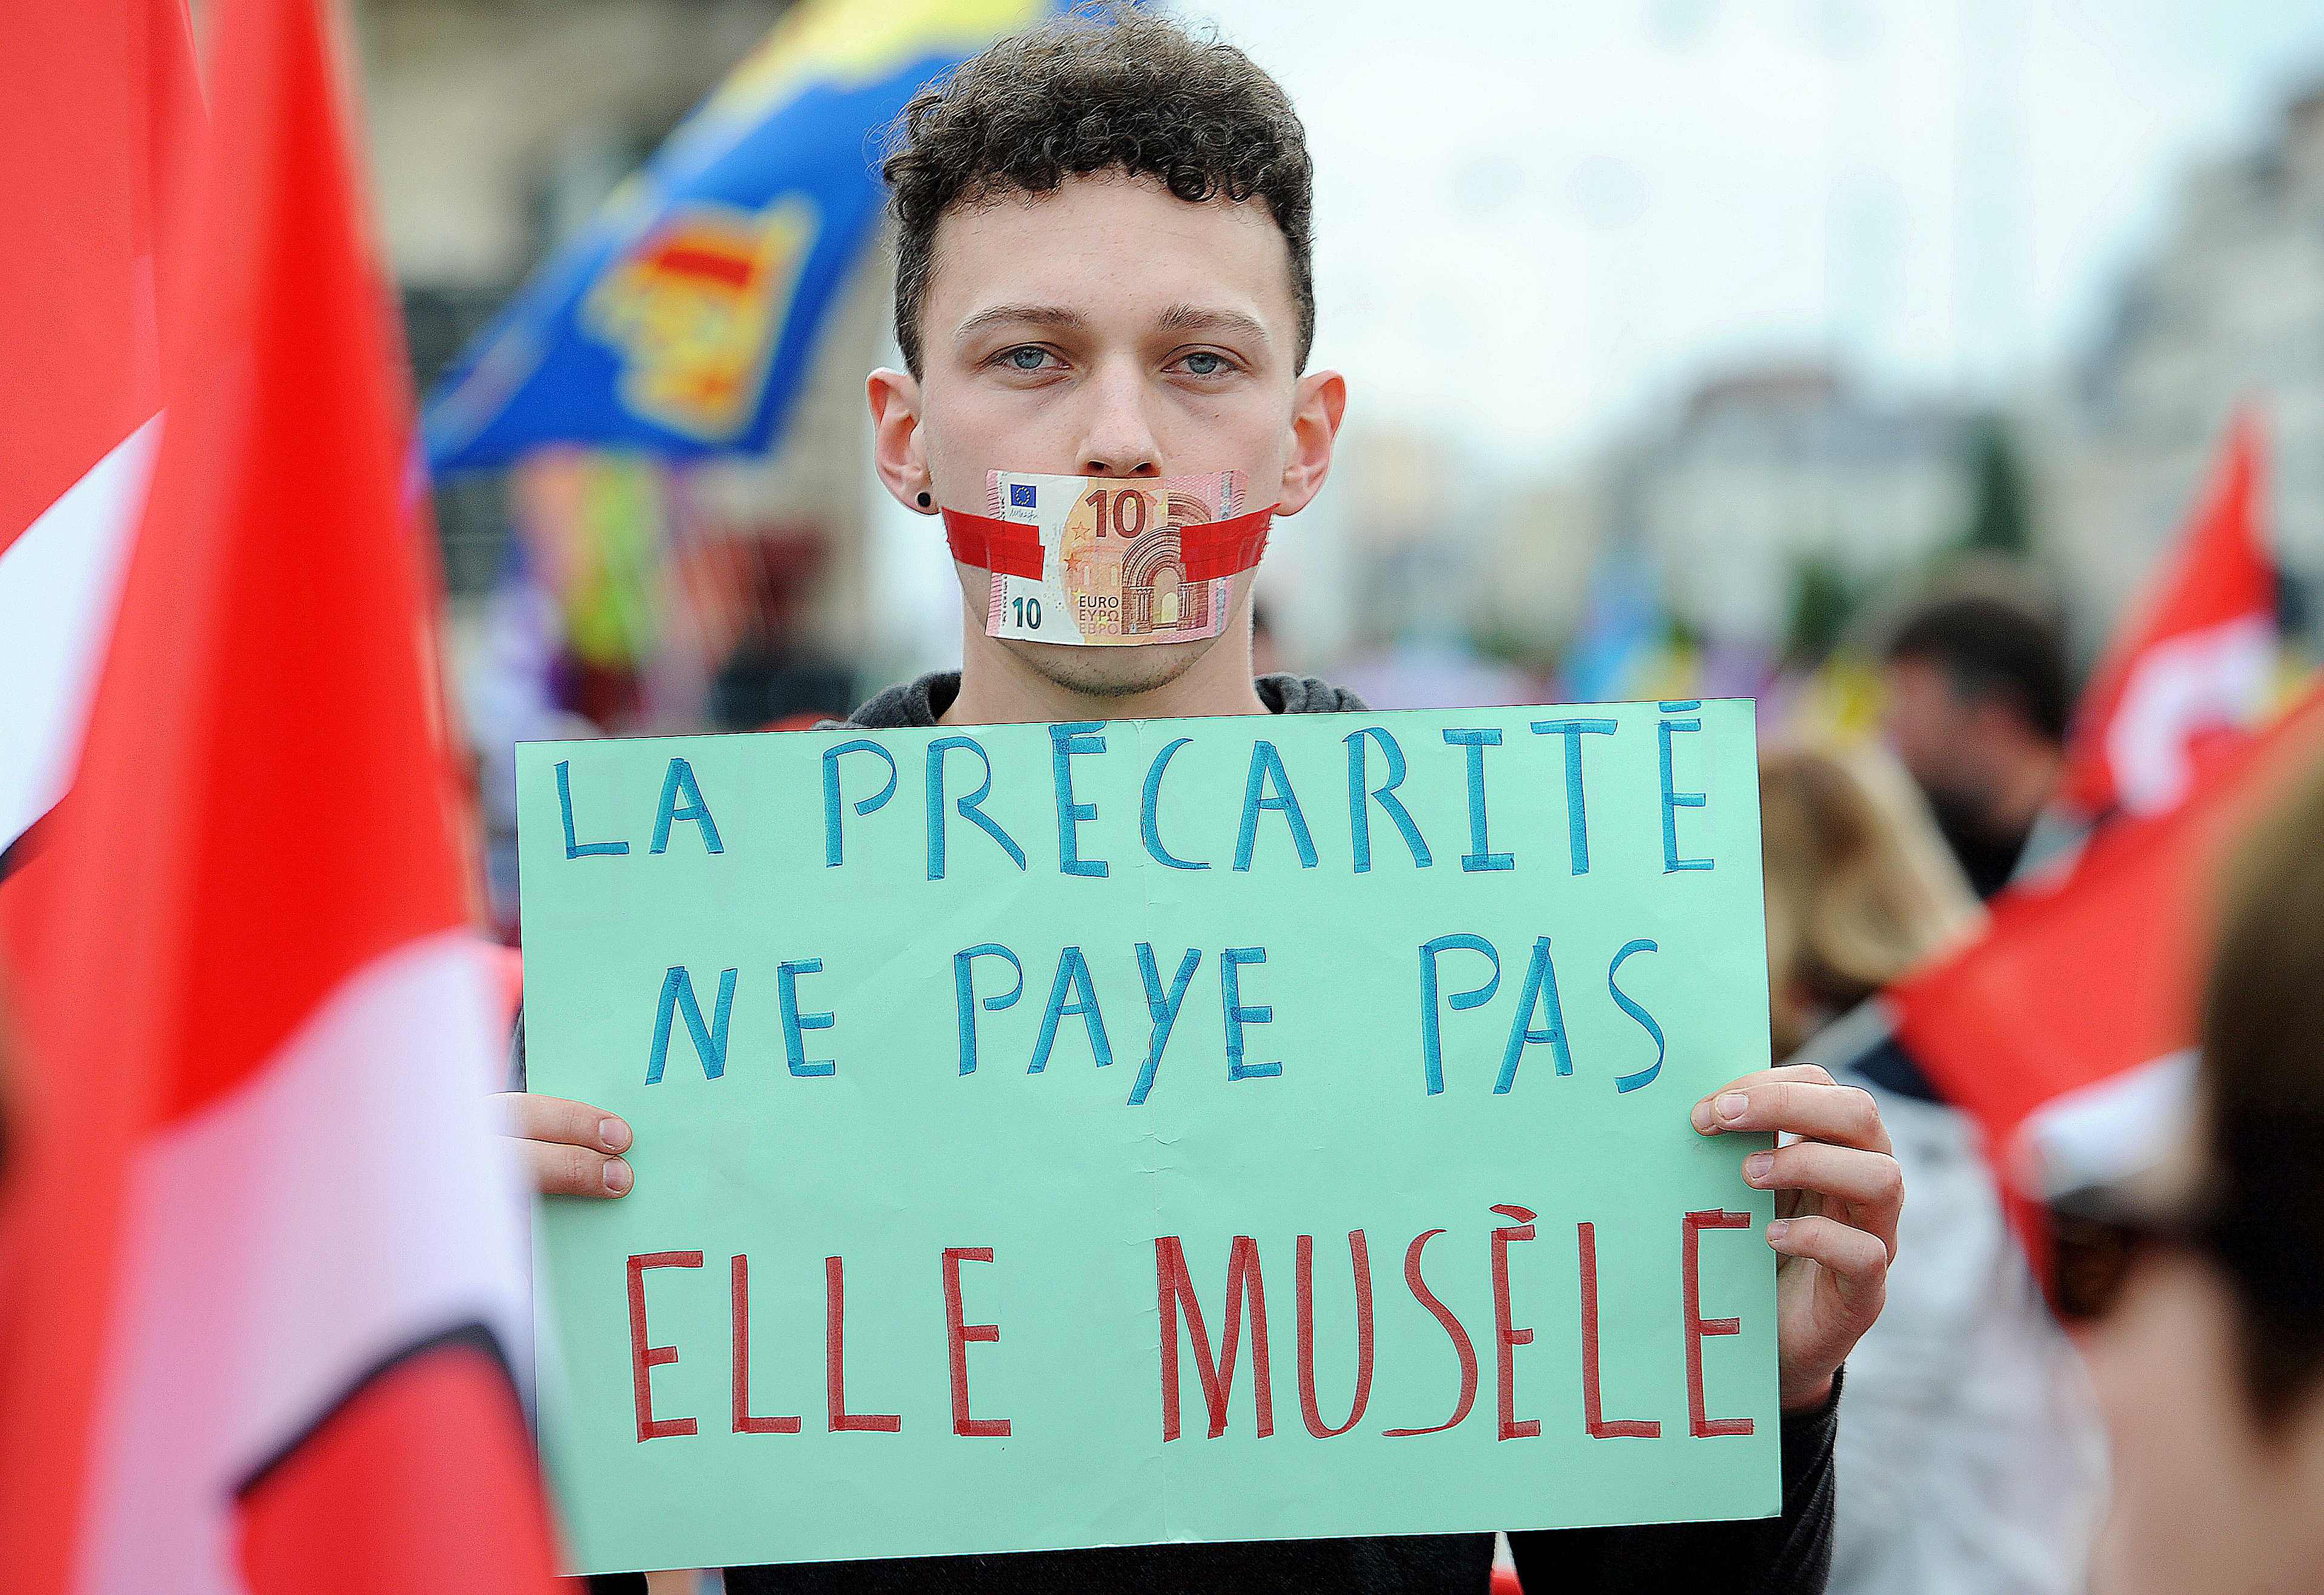 A man displays a placard which translates as ‘precarity doesn’t pay, it muzzles’ during a protest against controversial labor reforms on June 28, 2016 in Rennes.